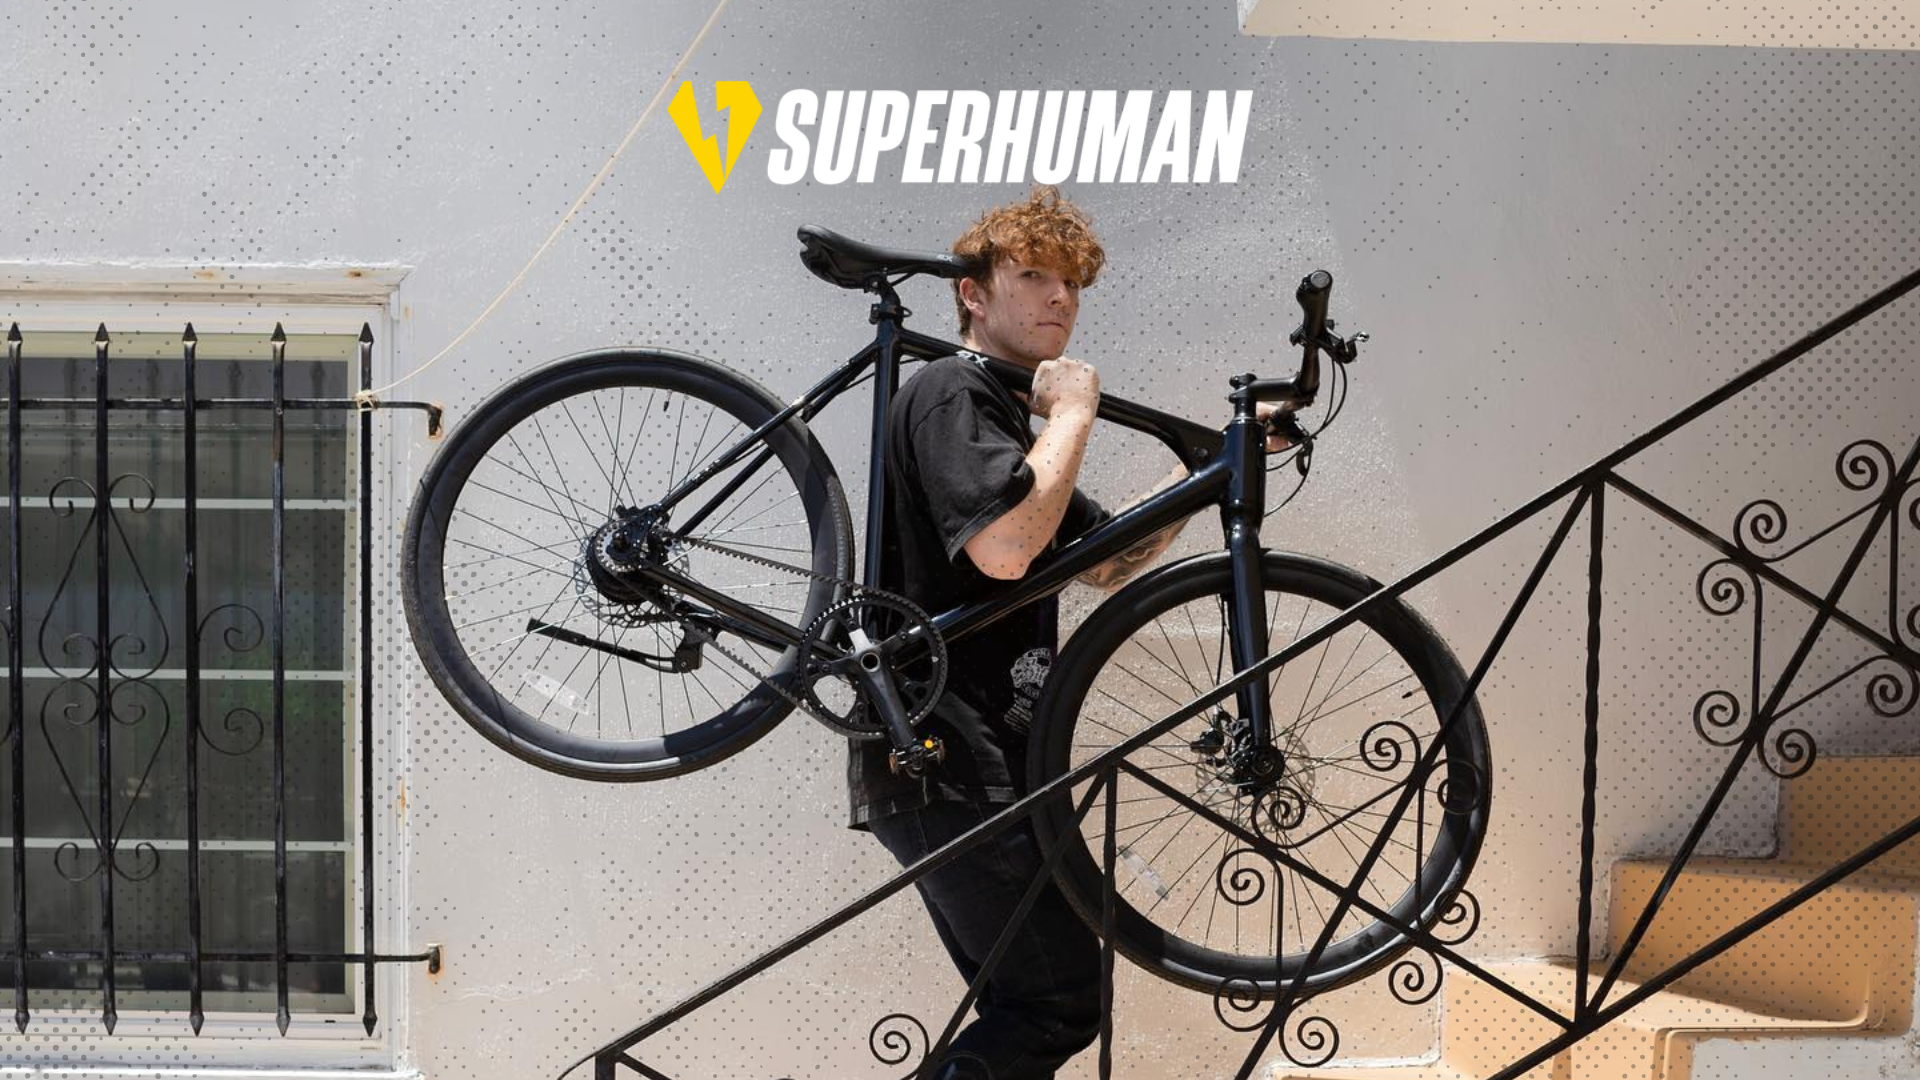 The Super Power on Two Wheels: How eBikes and SuperHuman Bikes Are Revolutionizing Our Streets